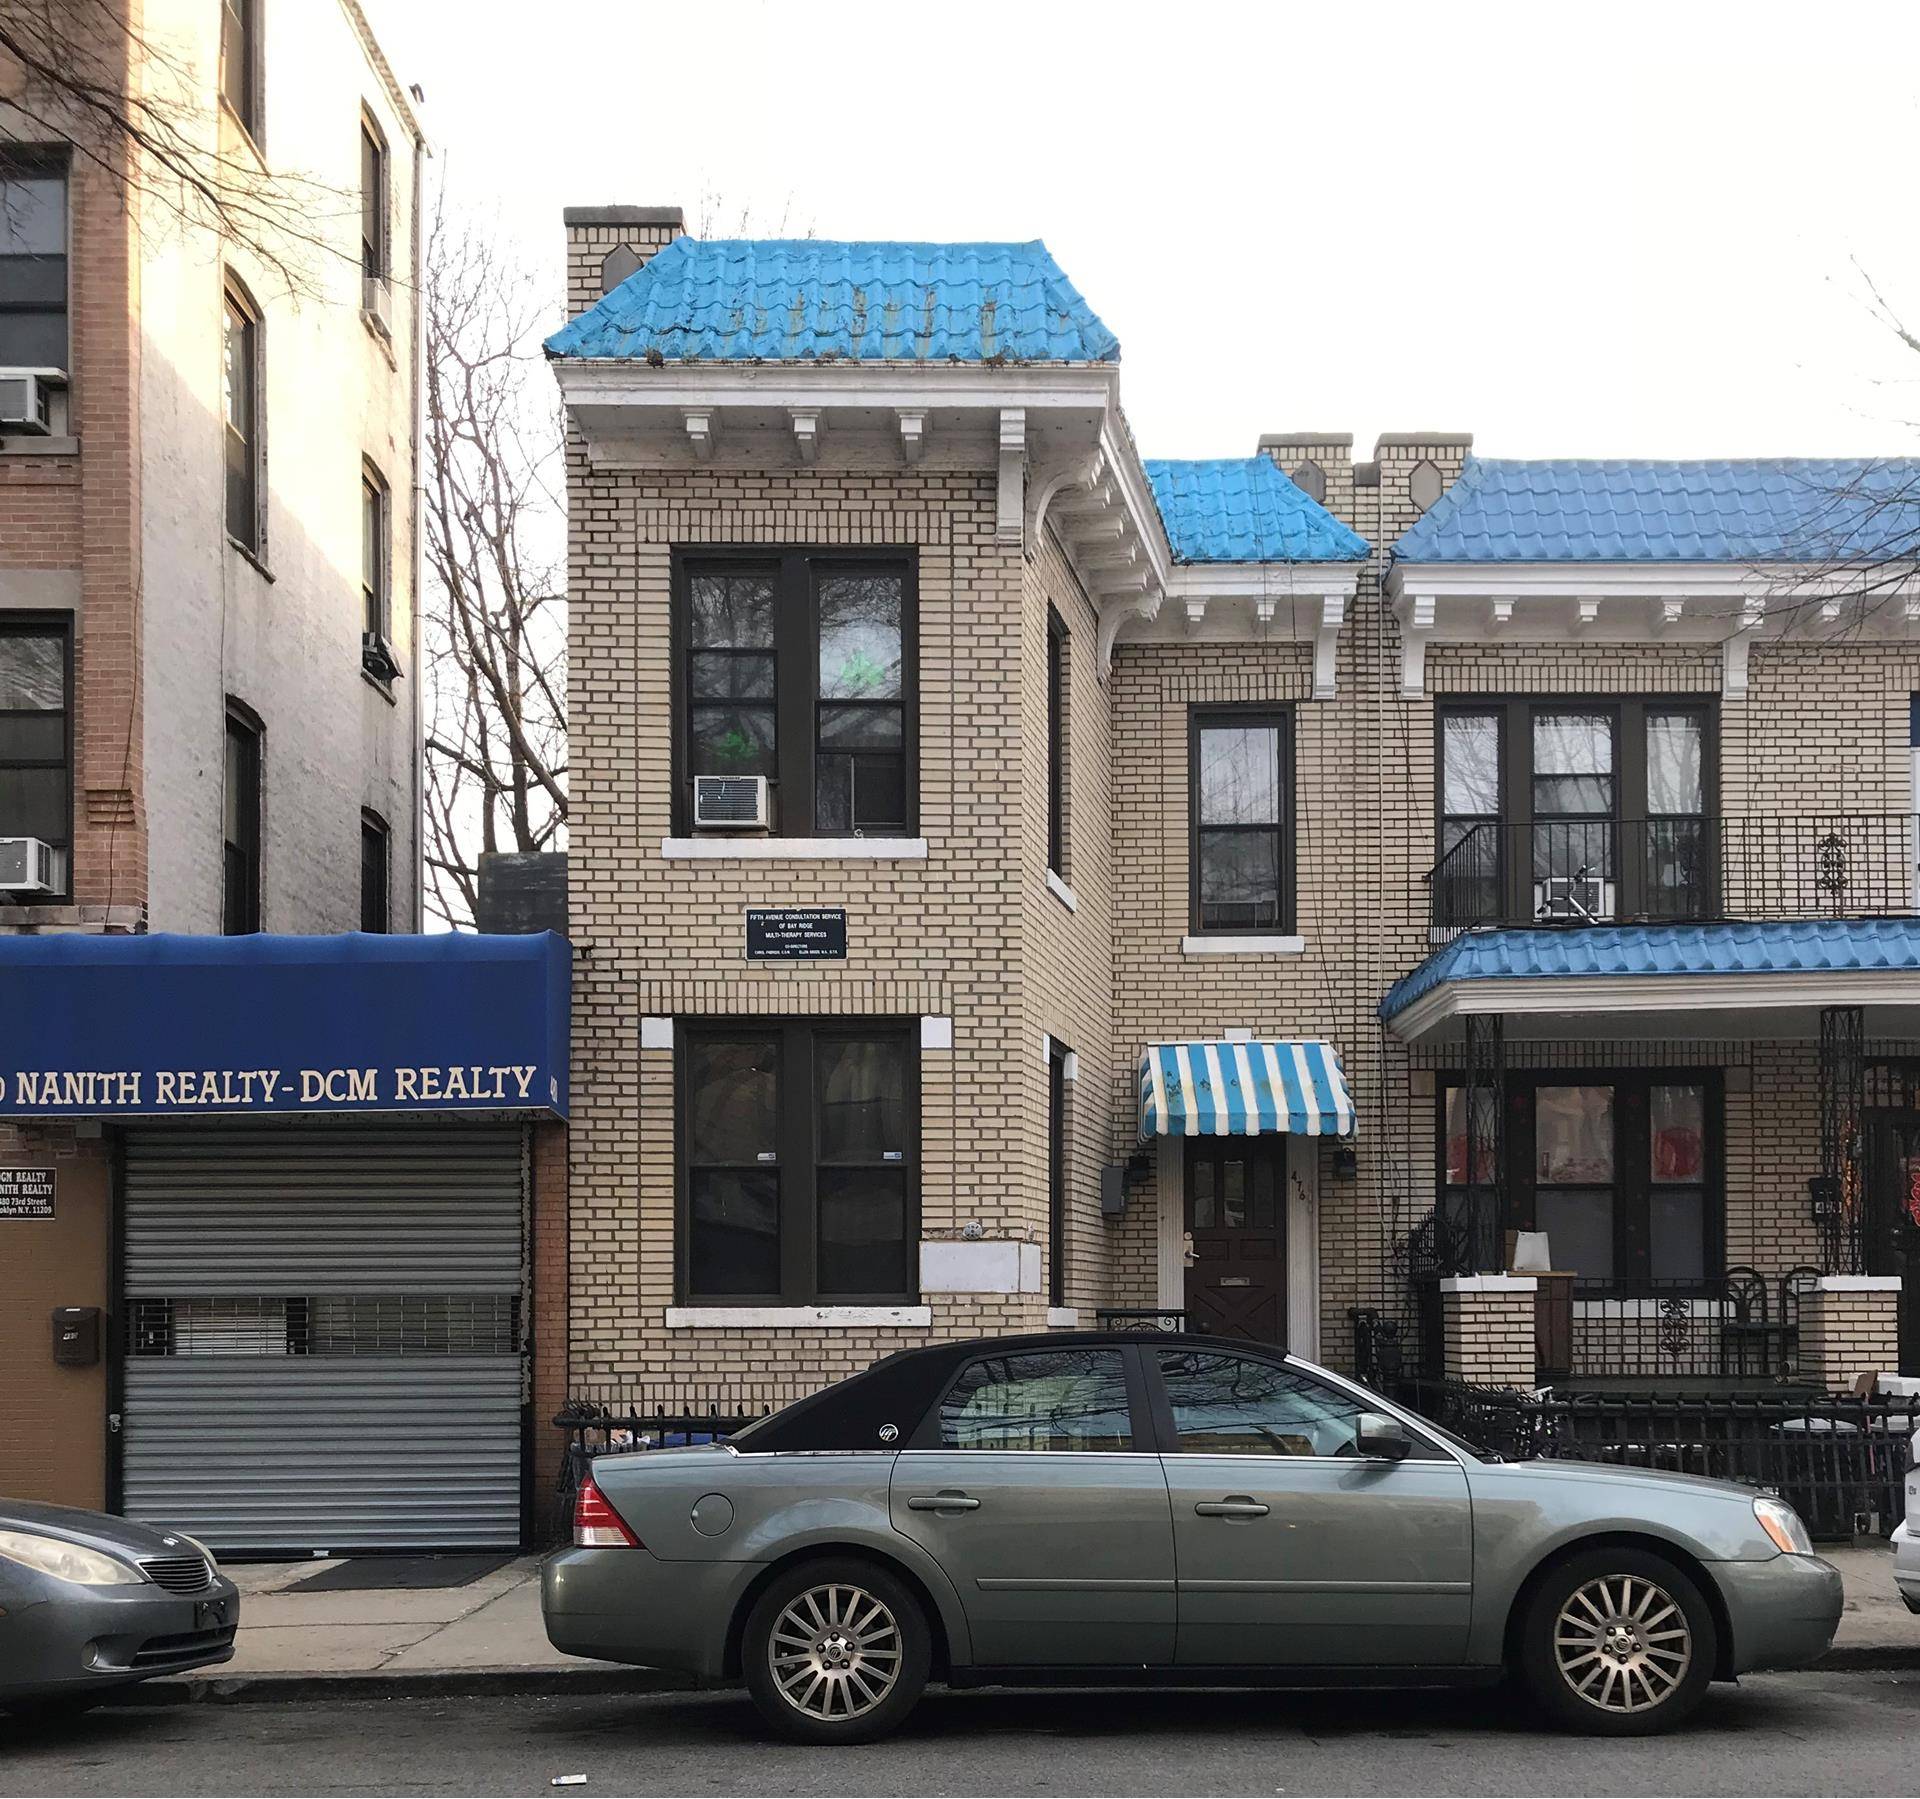 Welcome to 476 73rd Street, located in Bay Ridge between 4th and 5th Avenue.